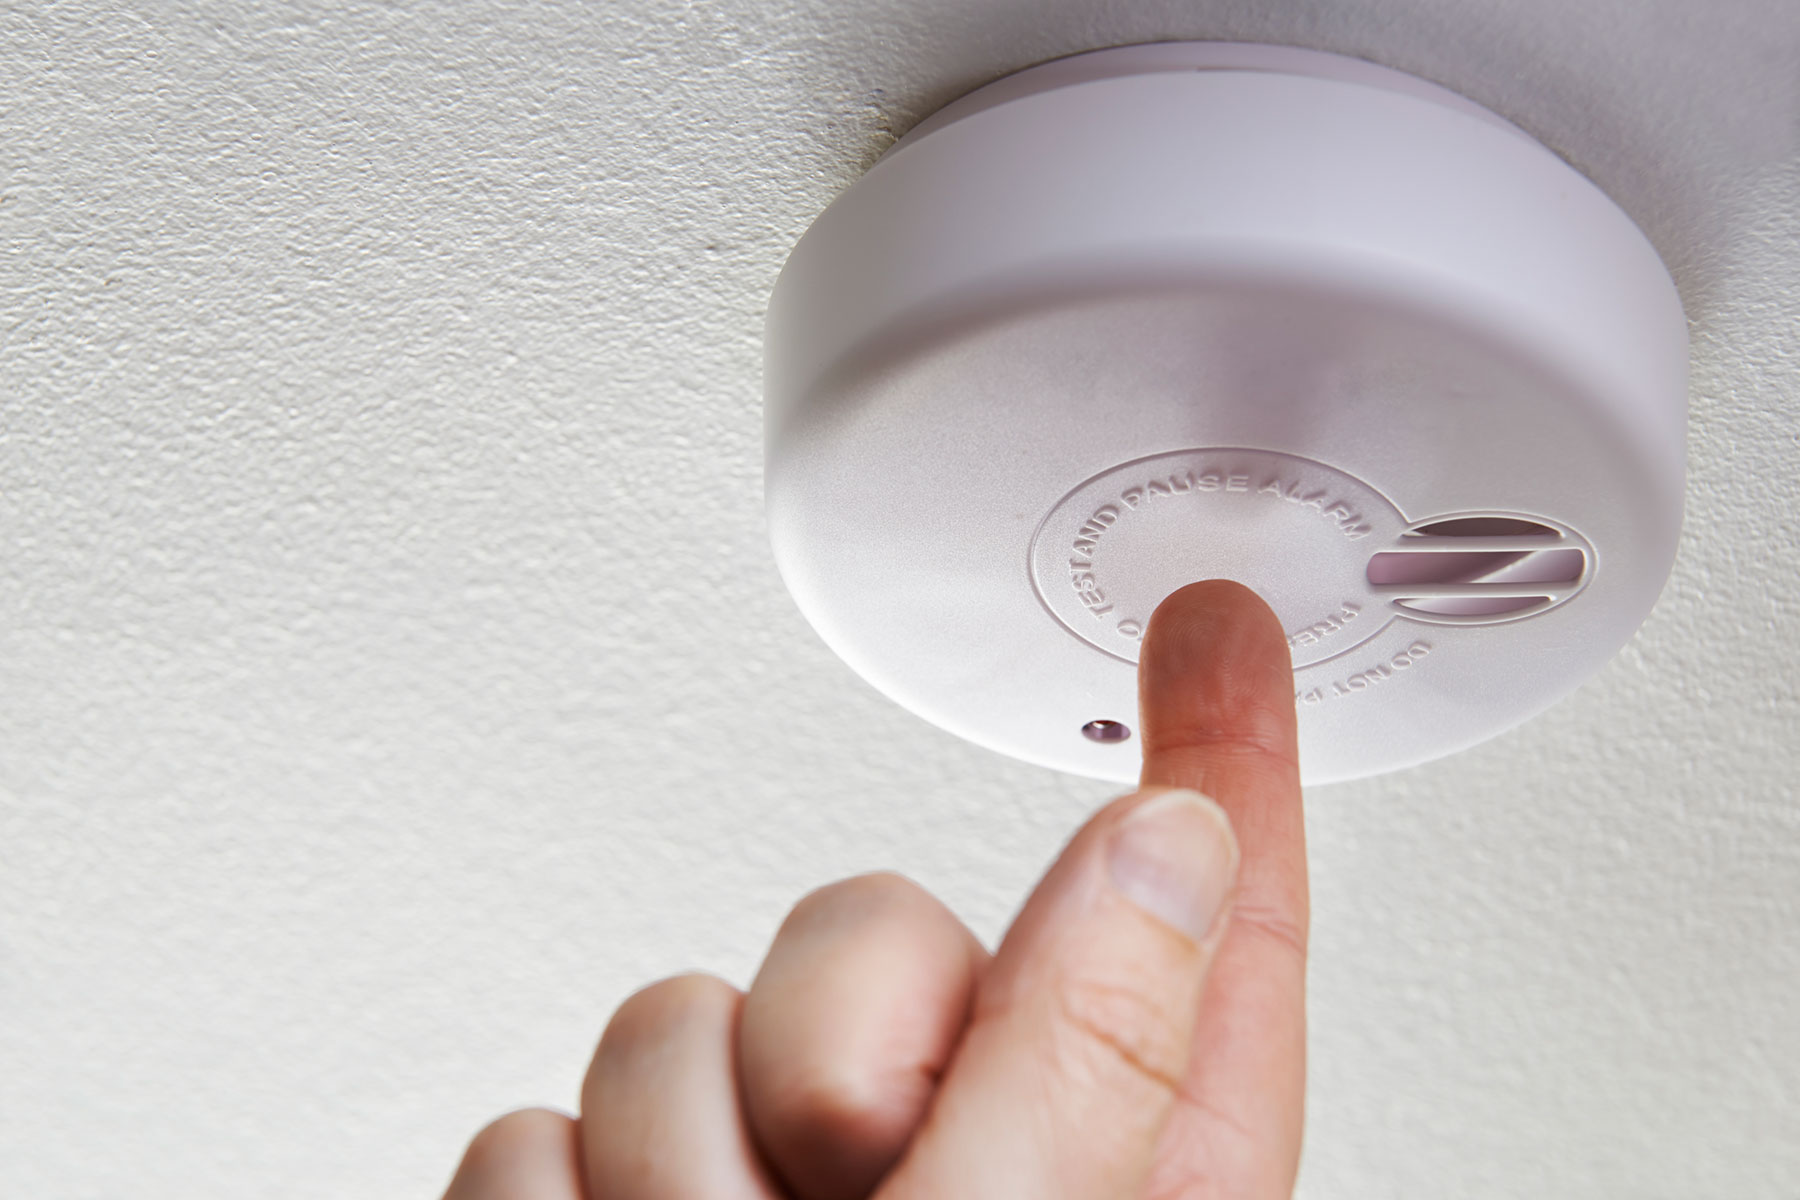 How To Remove Smoke Detector From The Ceiling